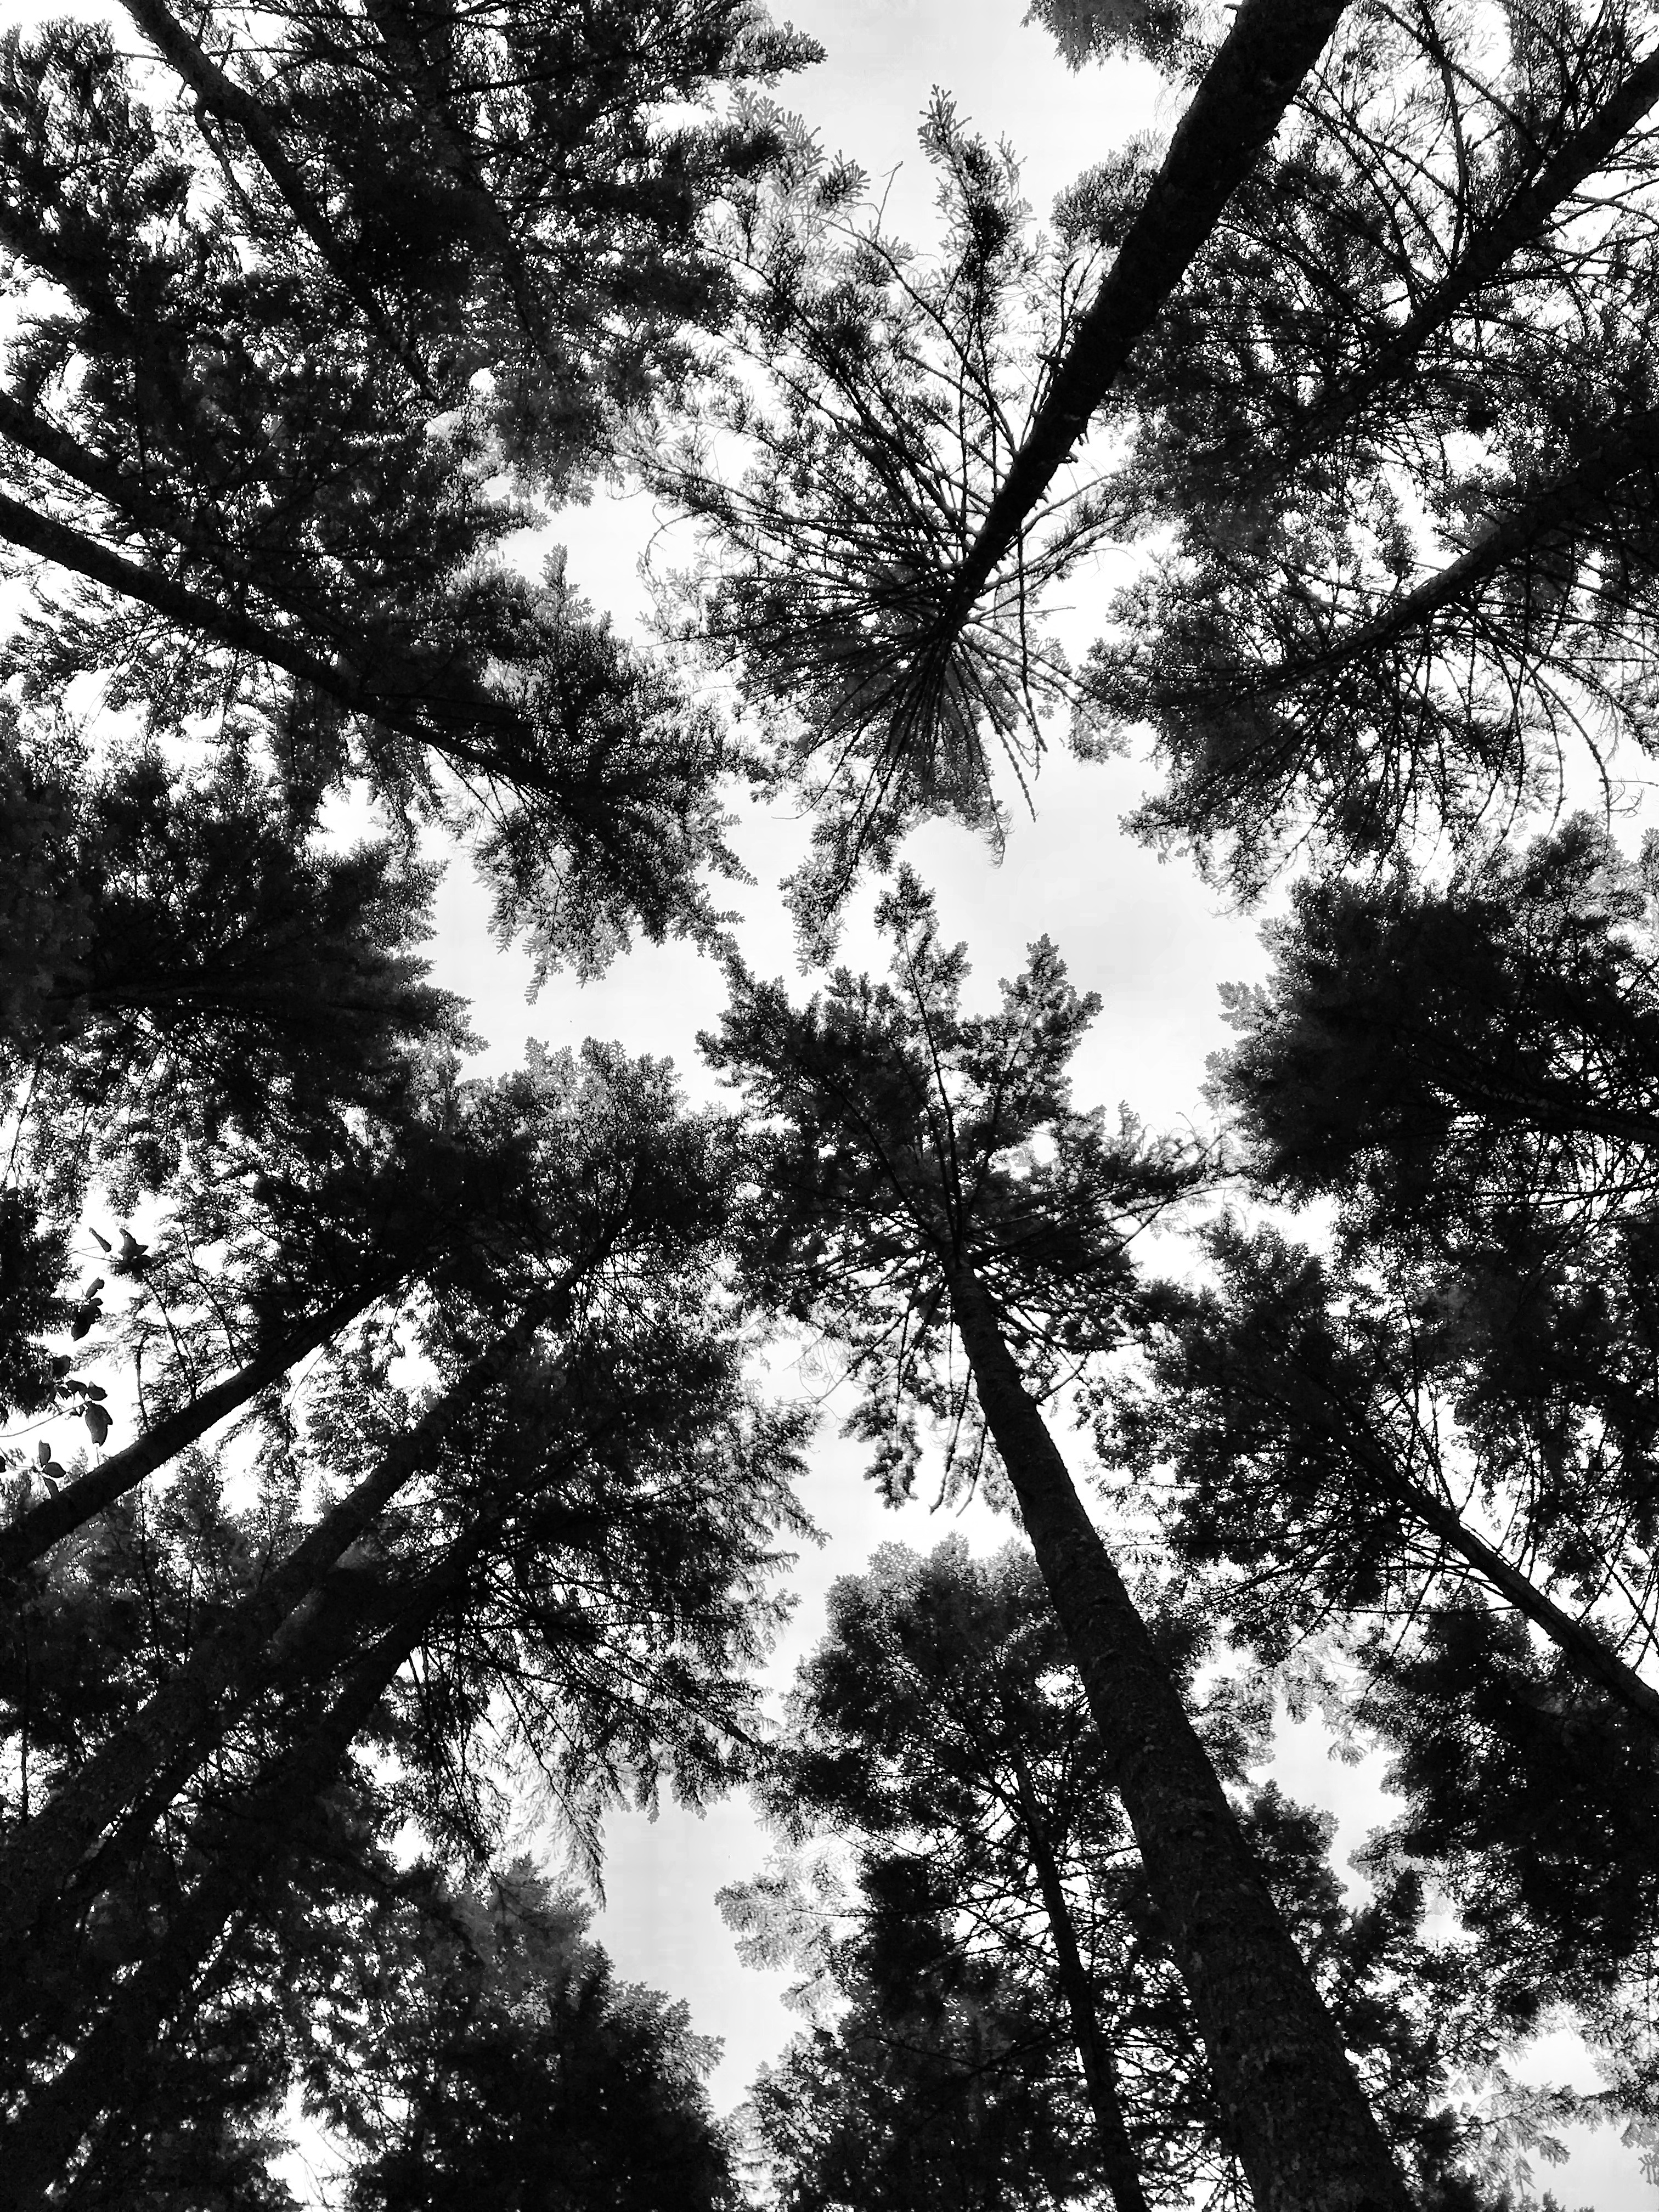 tops, chb, nature, trees, top, forest, crown, bw, view, crowns, dizzy, giddy